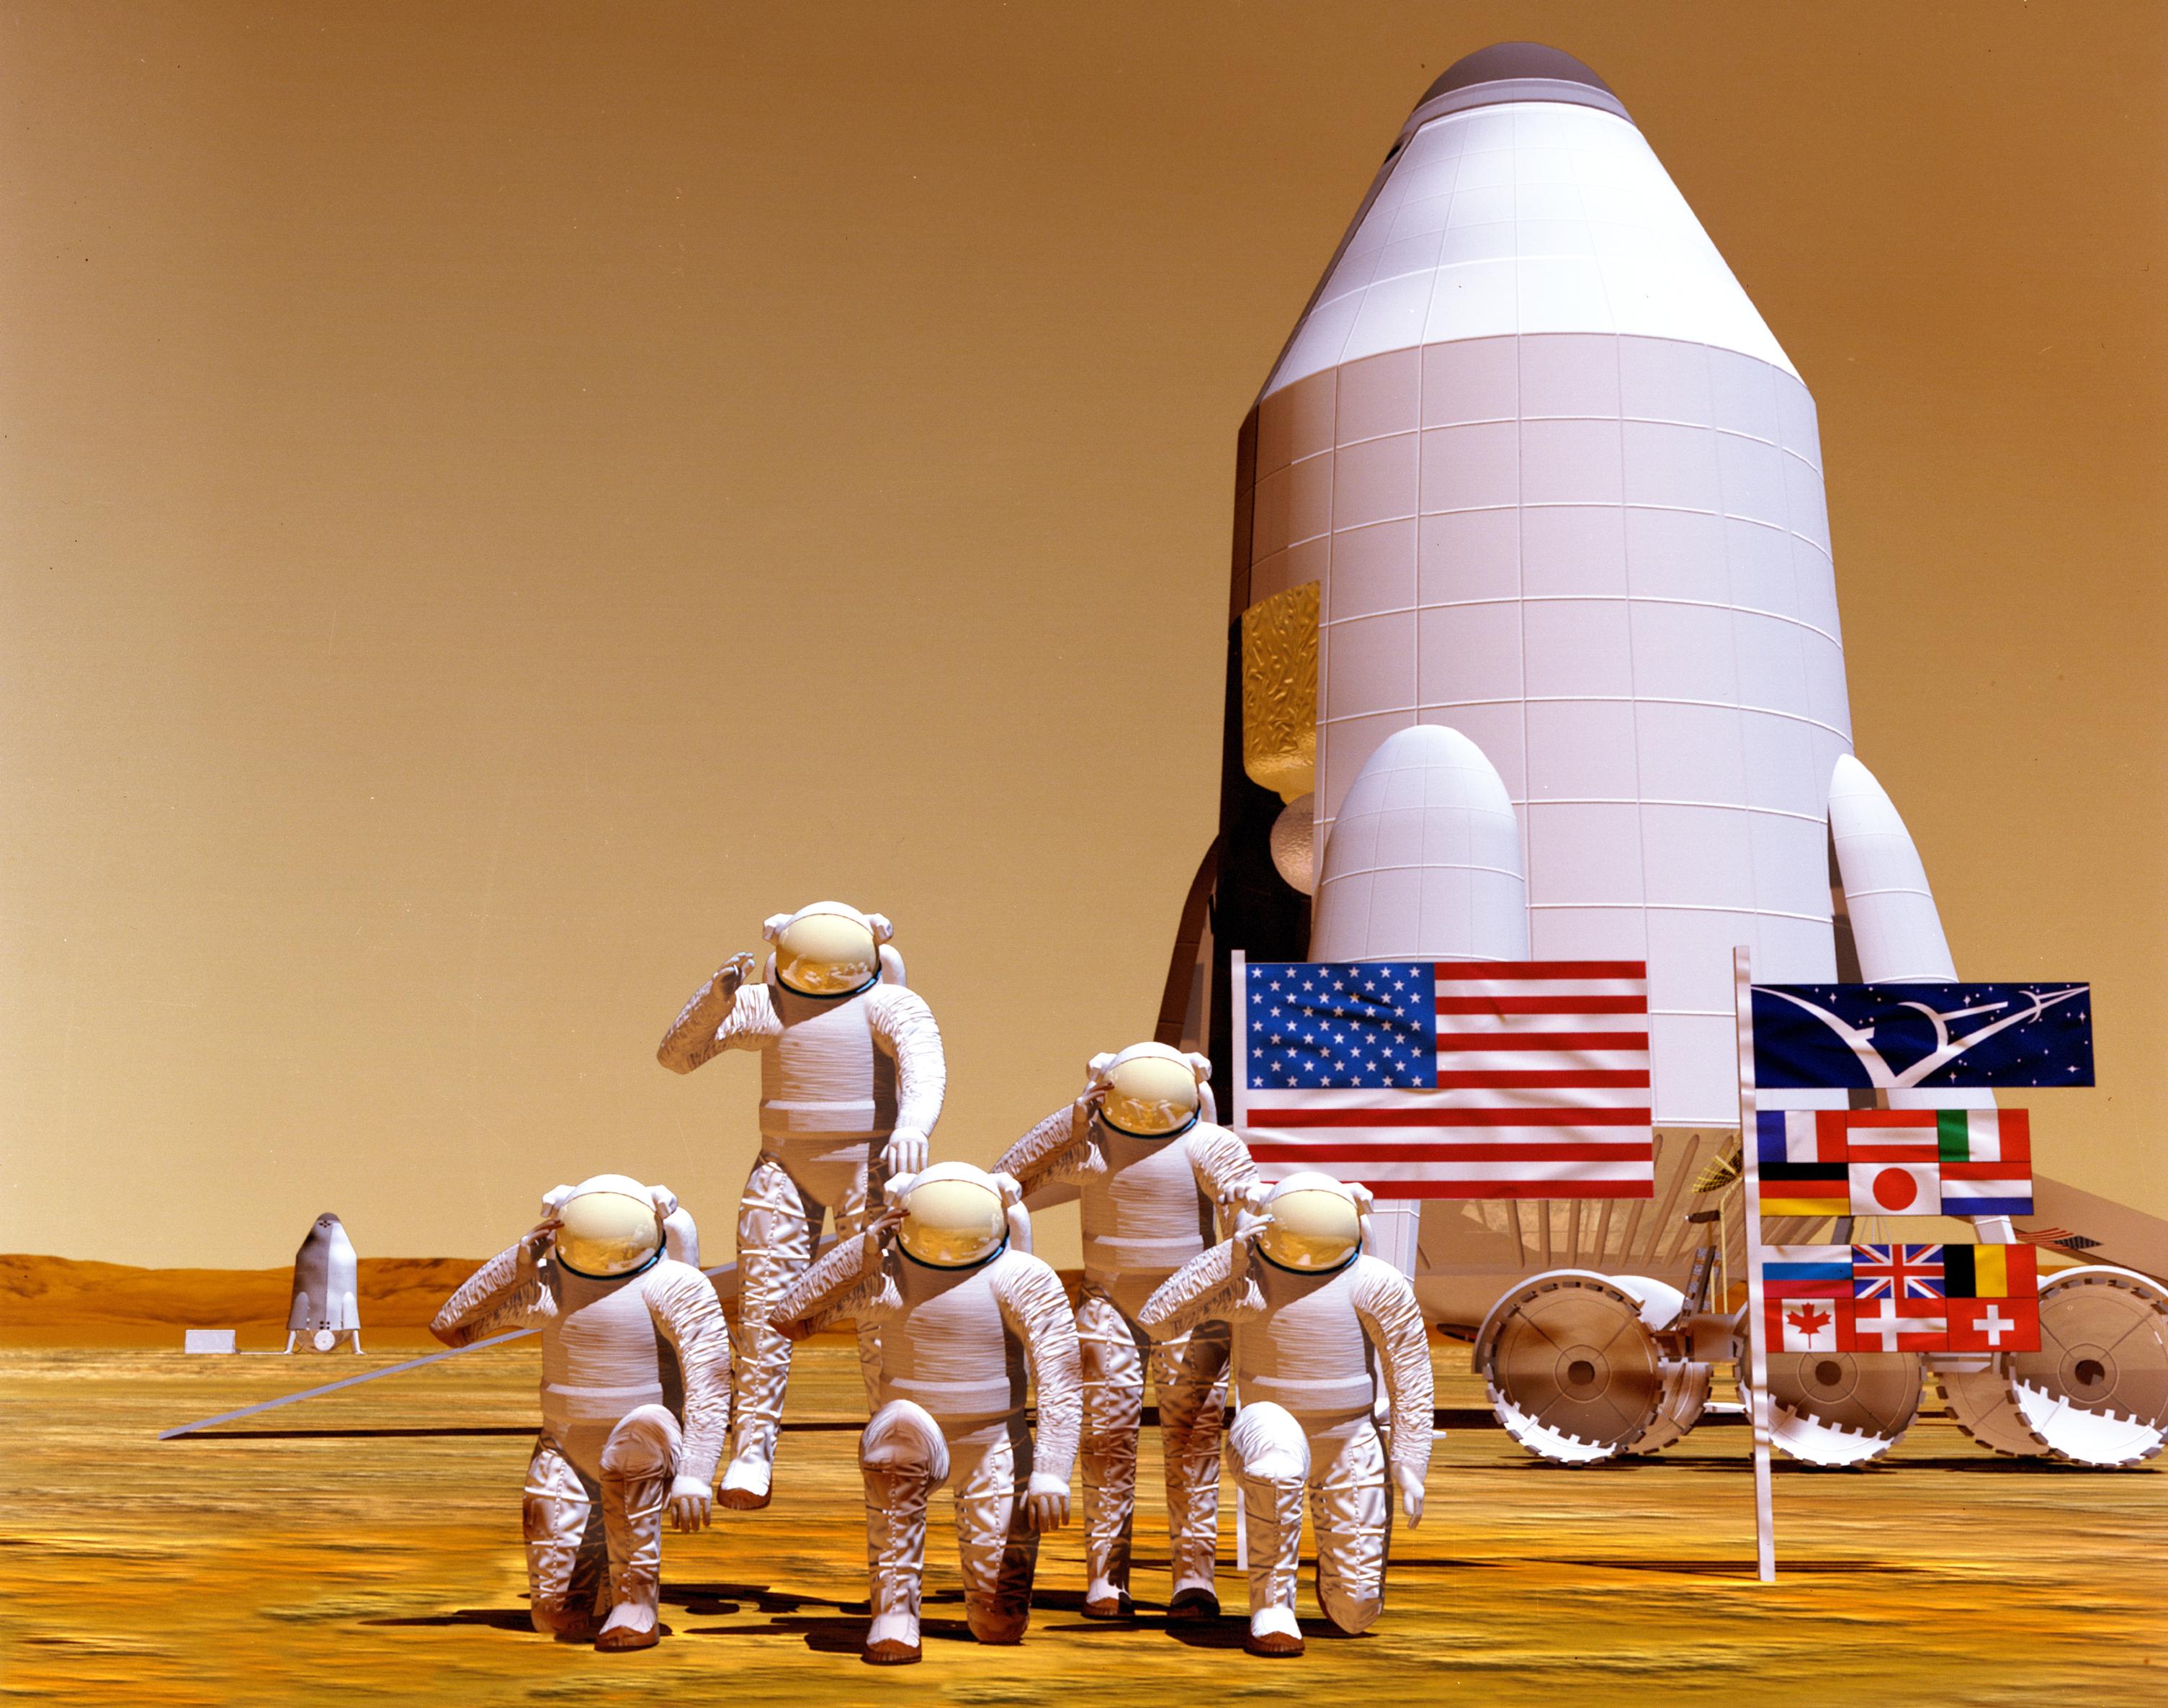 In this artist's concept, a full crew of astronauts on Mars salutes in a tribute to humans on Earth.